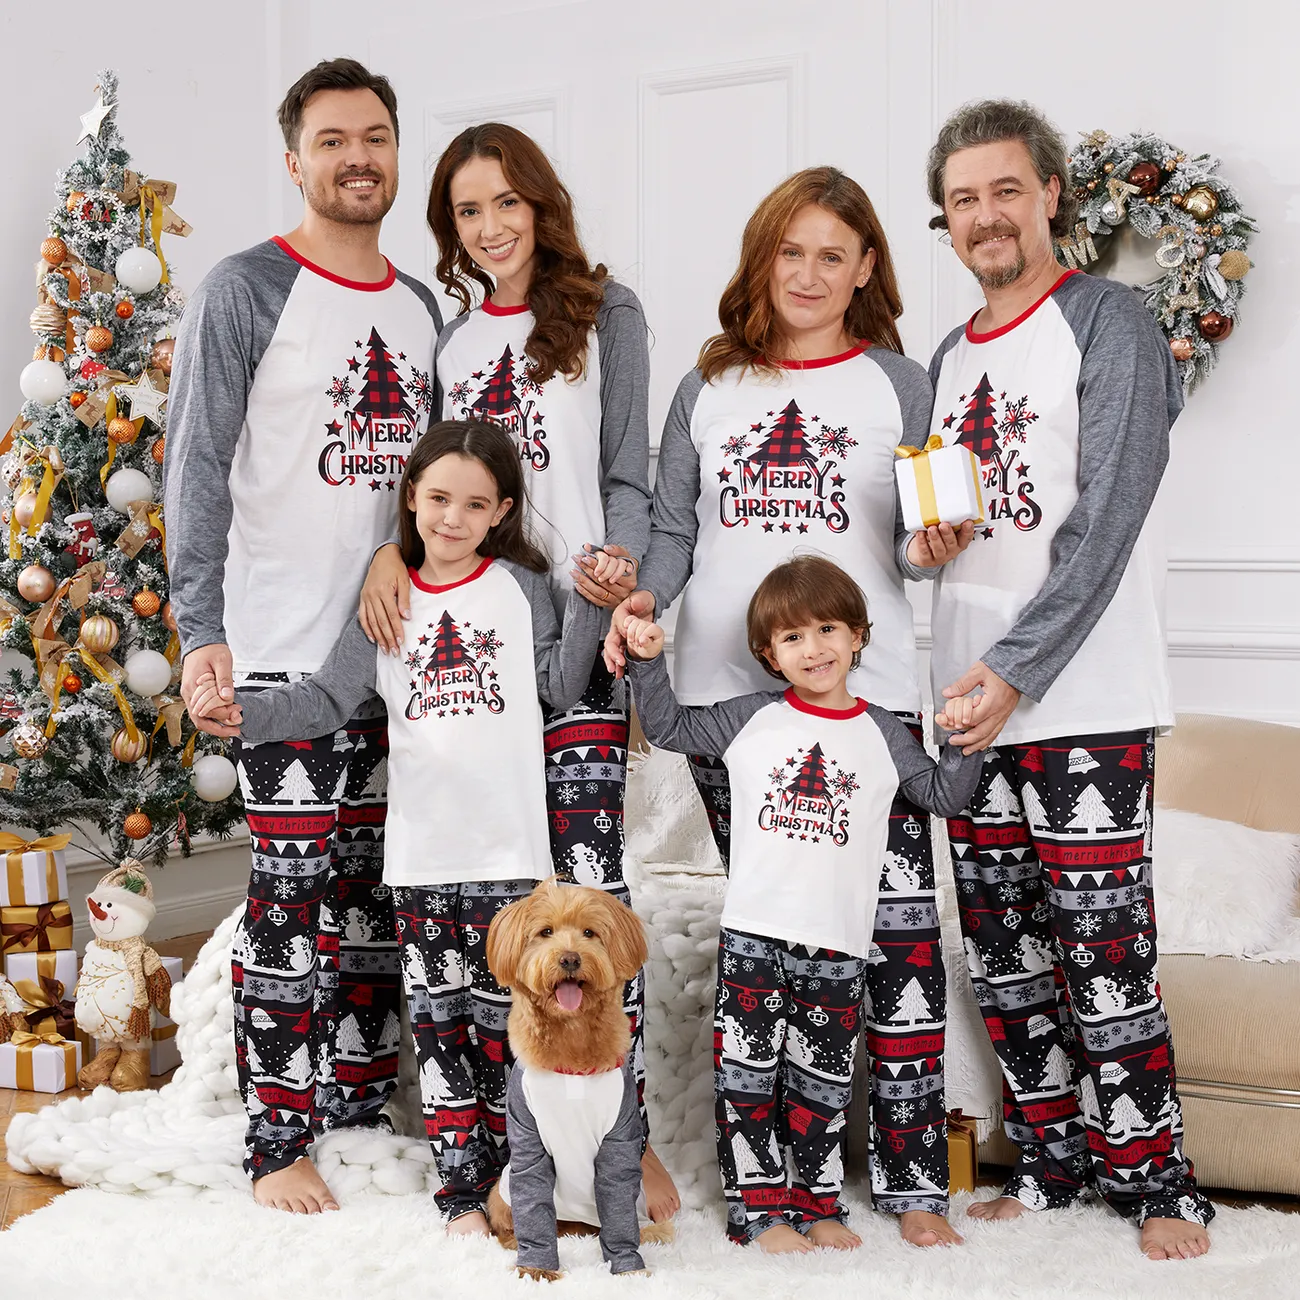 Christmas Family Matching Letter and Gingerbread Man Print Long-sleeve Pajamas  Sets (Flame Resistant) Only $12.99 PatPat US Mobile